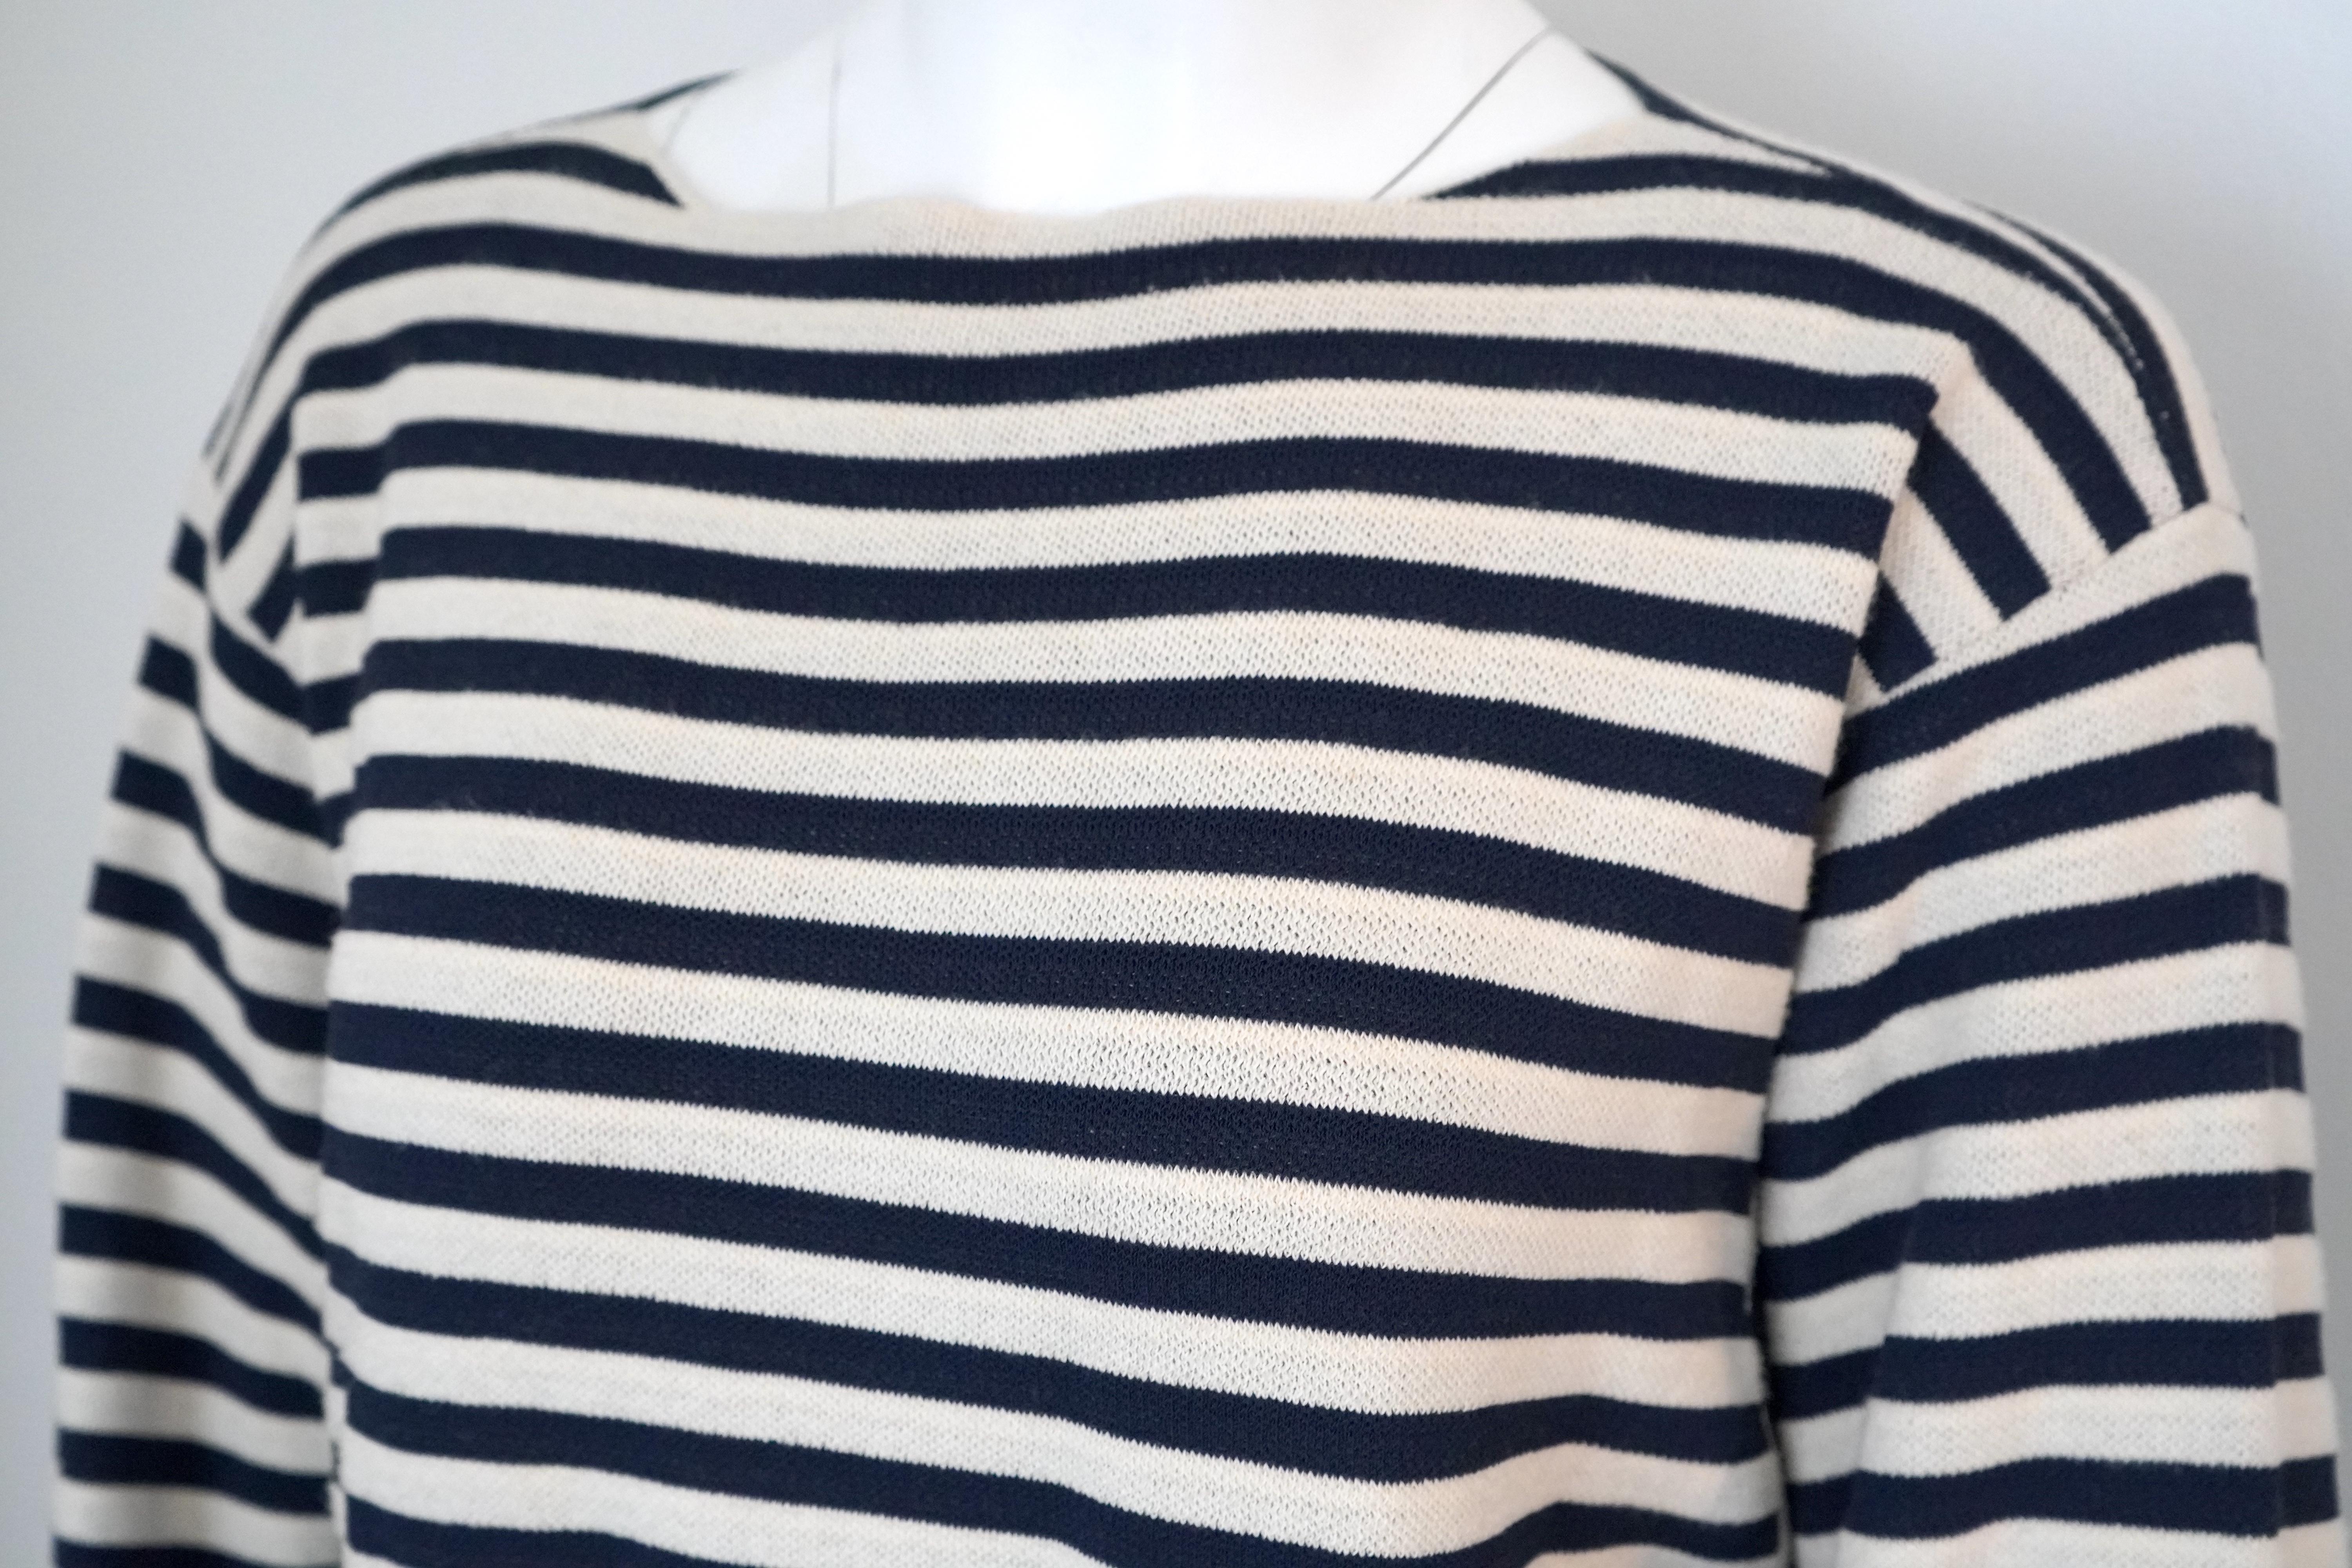 Celine Cream & Navy Striped Sweater sz L In Excellent Condition For Sale In Beverly Hills, CA